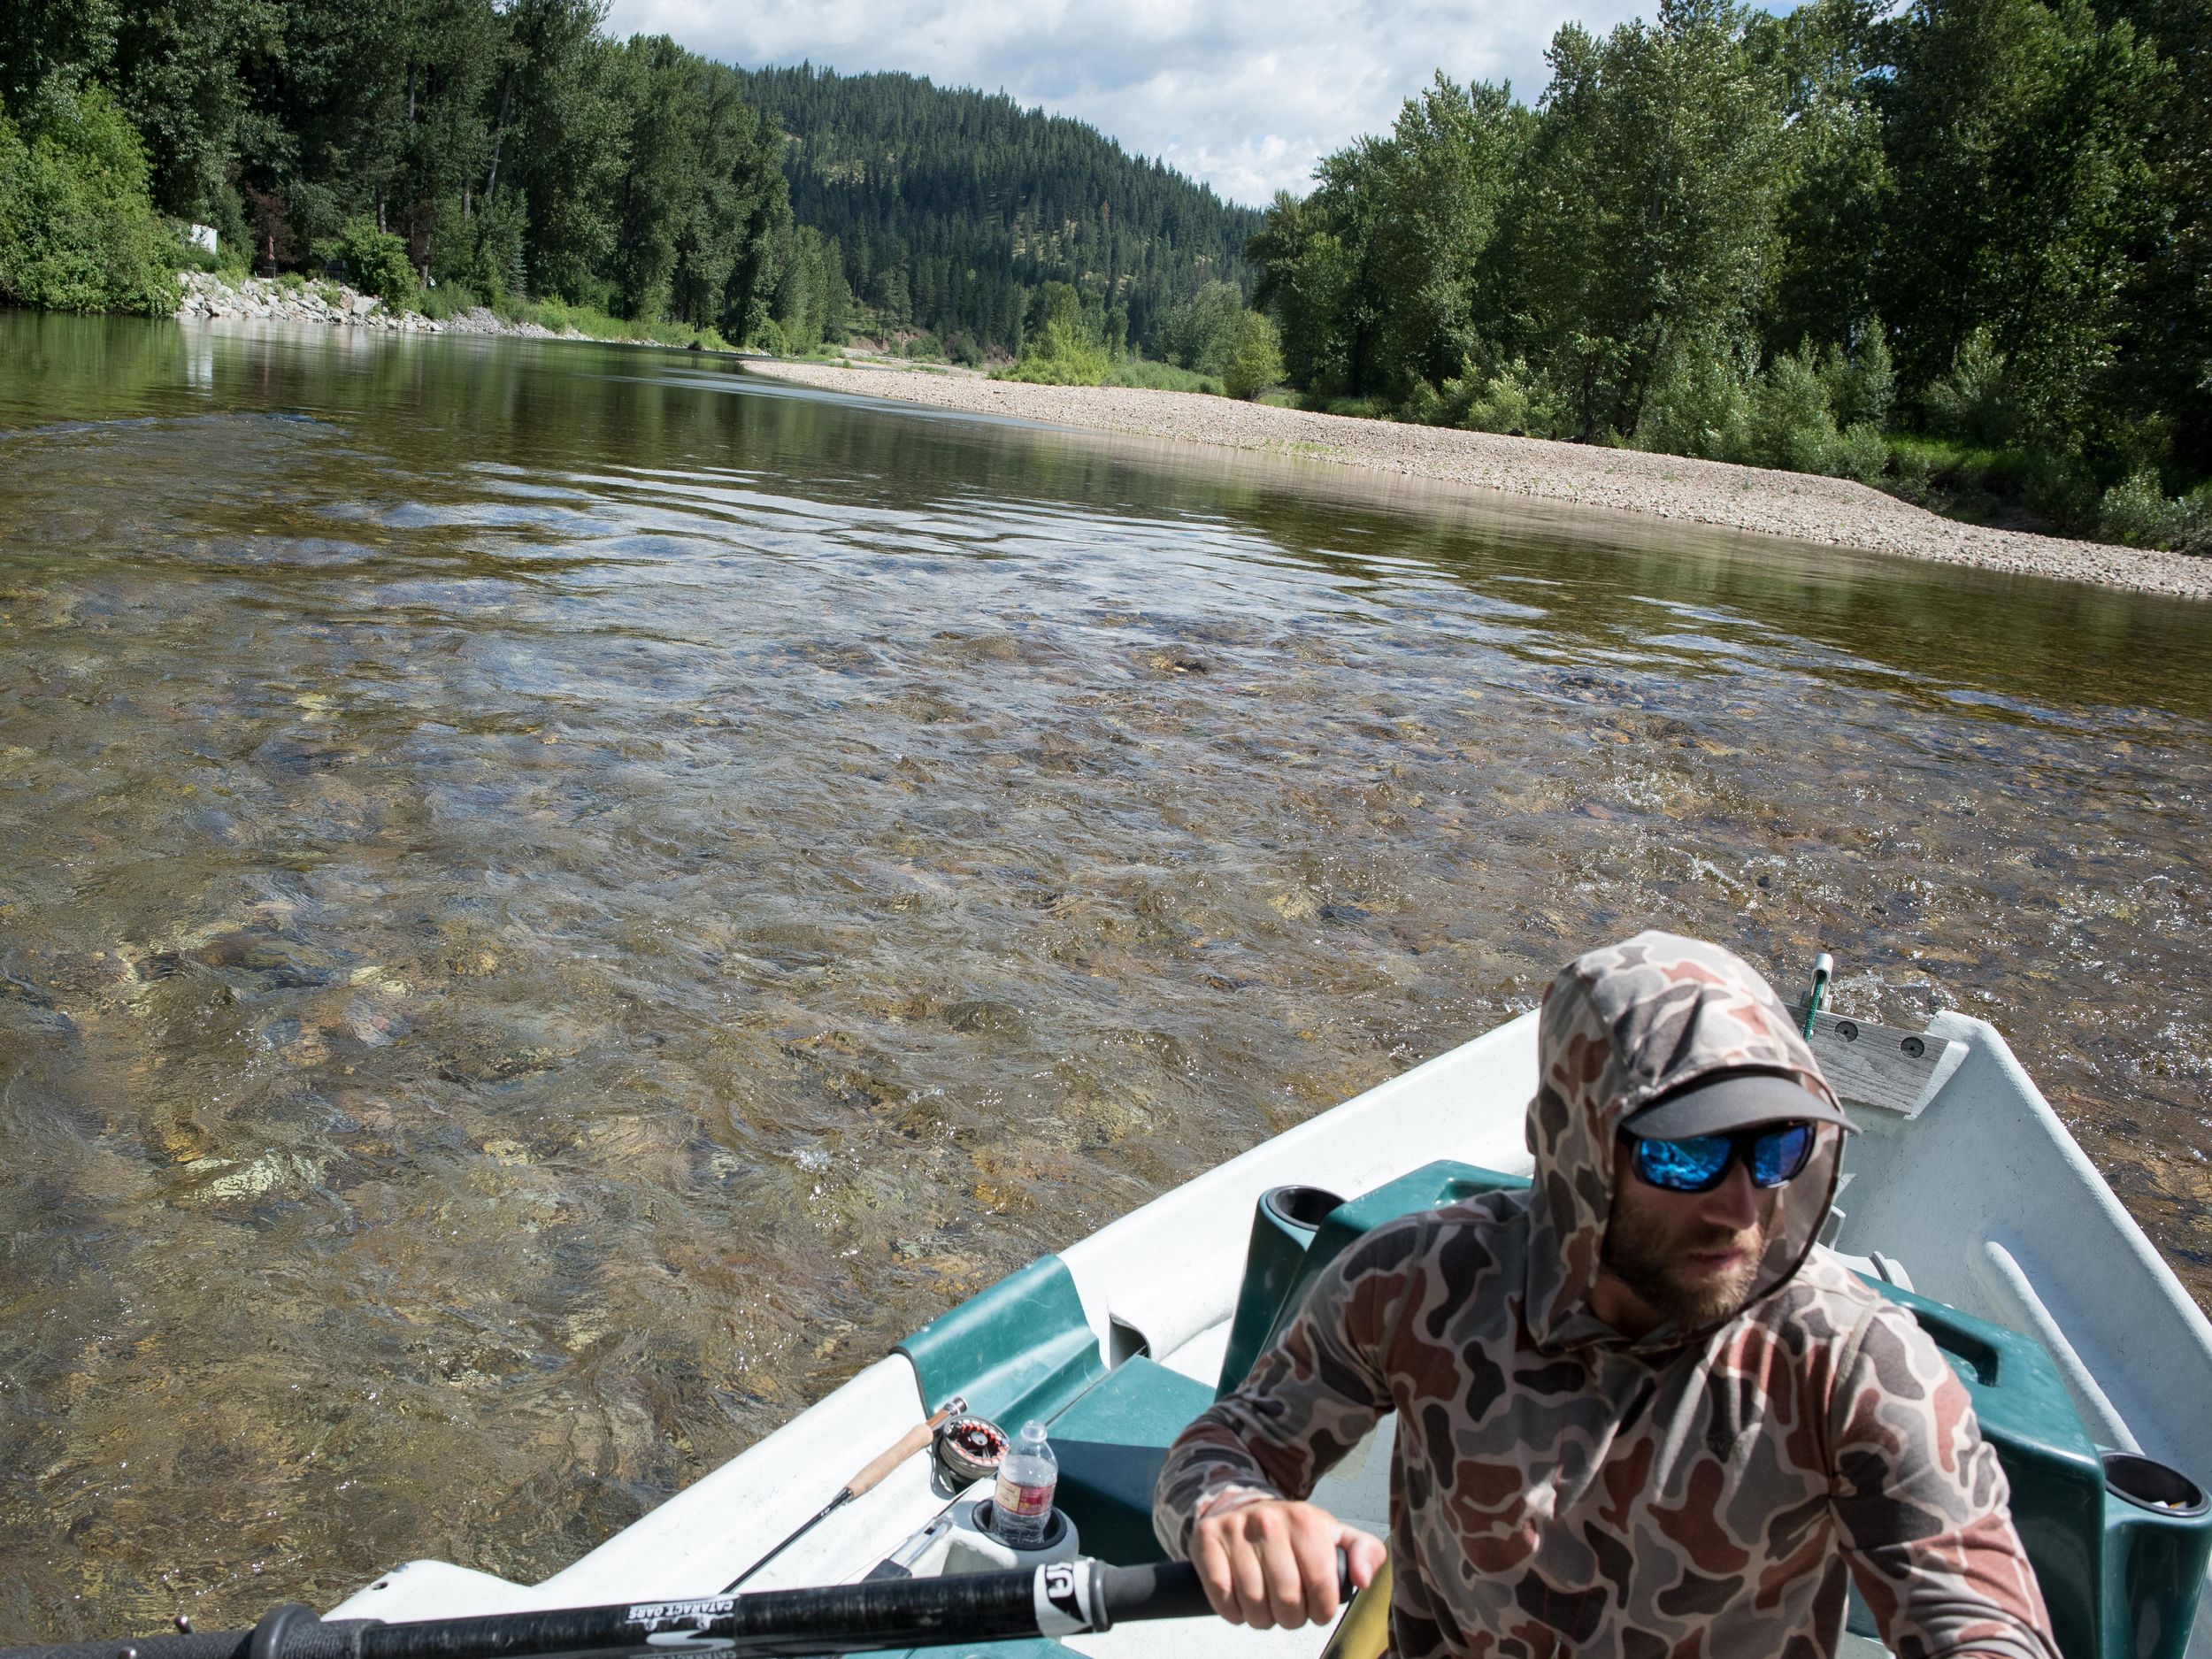 Fishing the North Fork - June 26, 2019